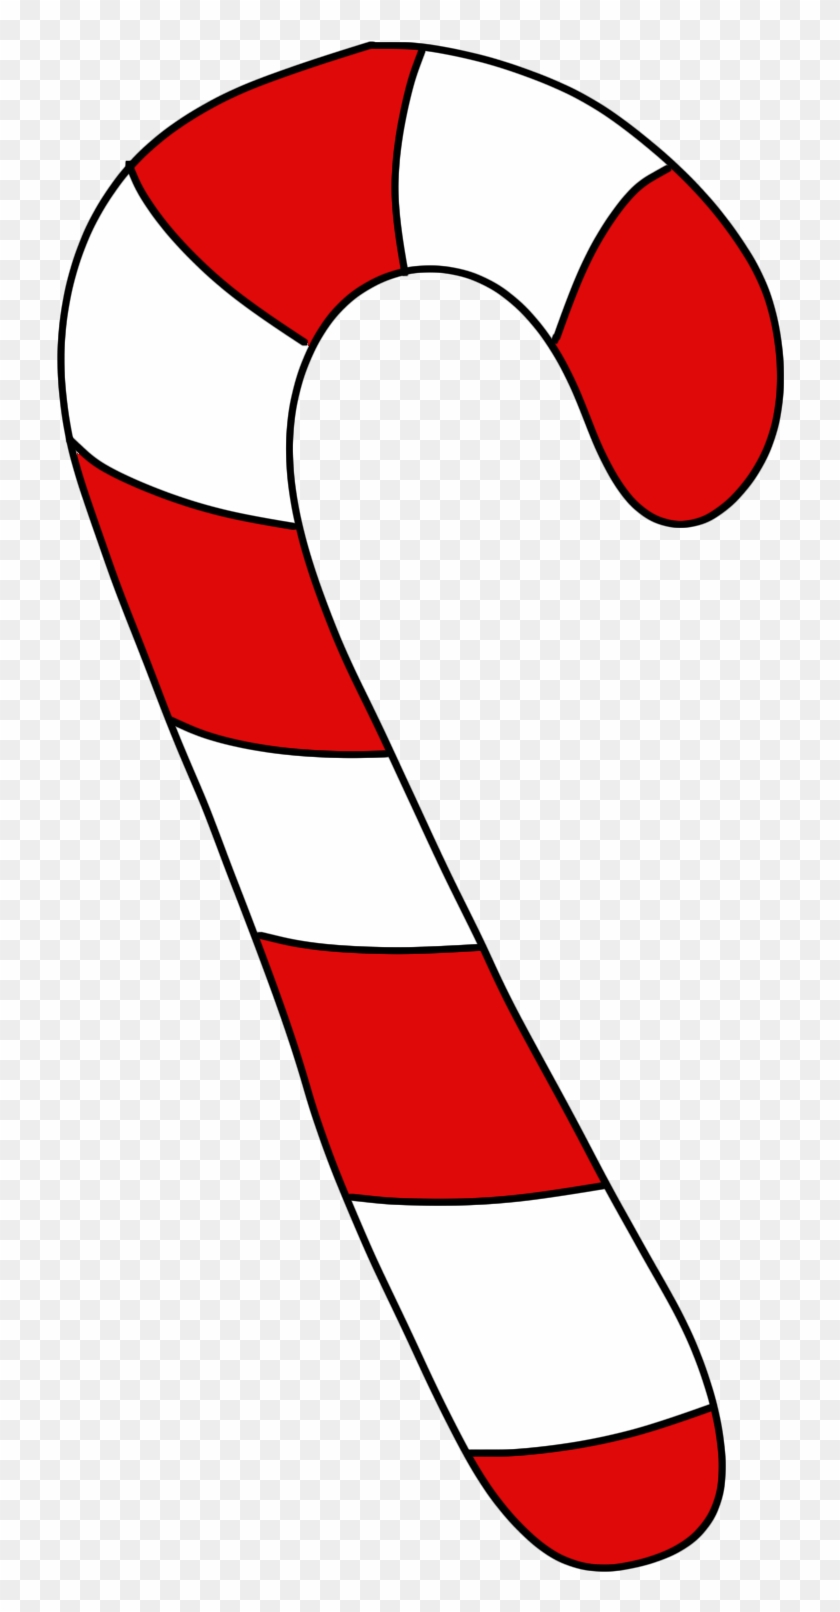 Candy Cane Clip Art Clipart Free Clipart Microsoft - Stick Candy #130925